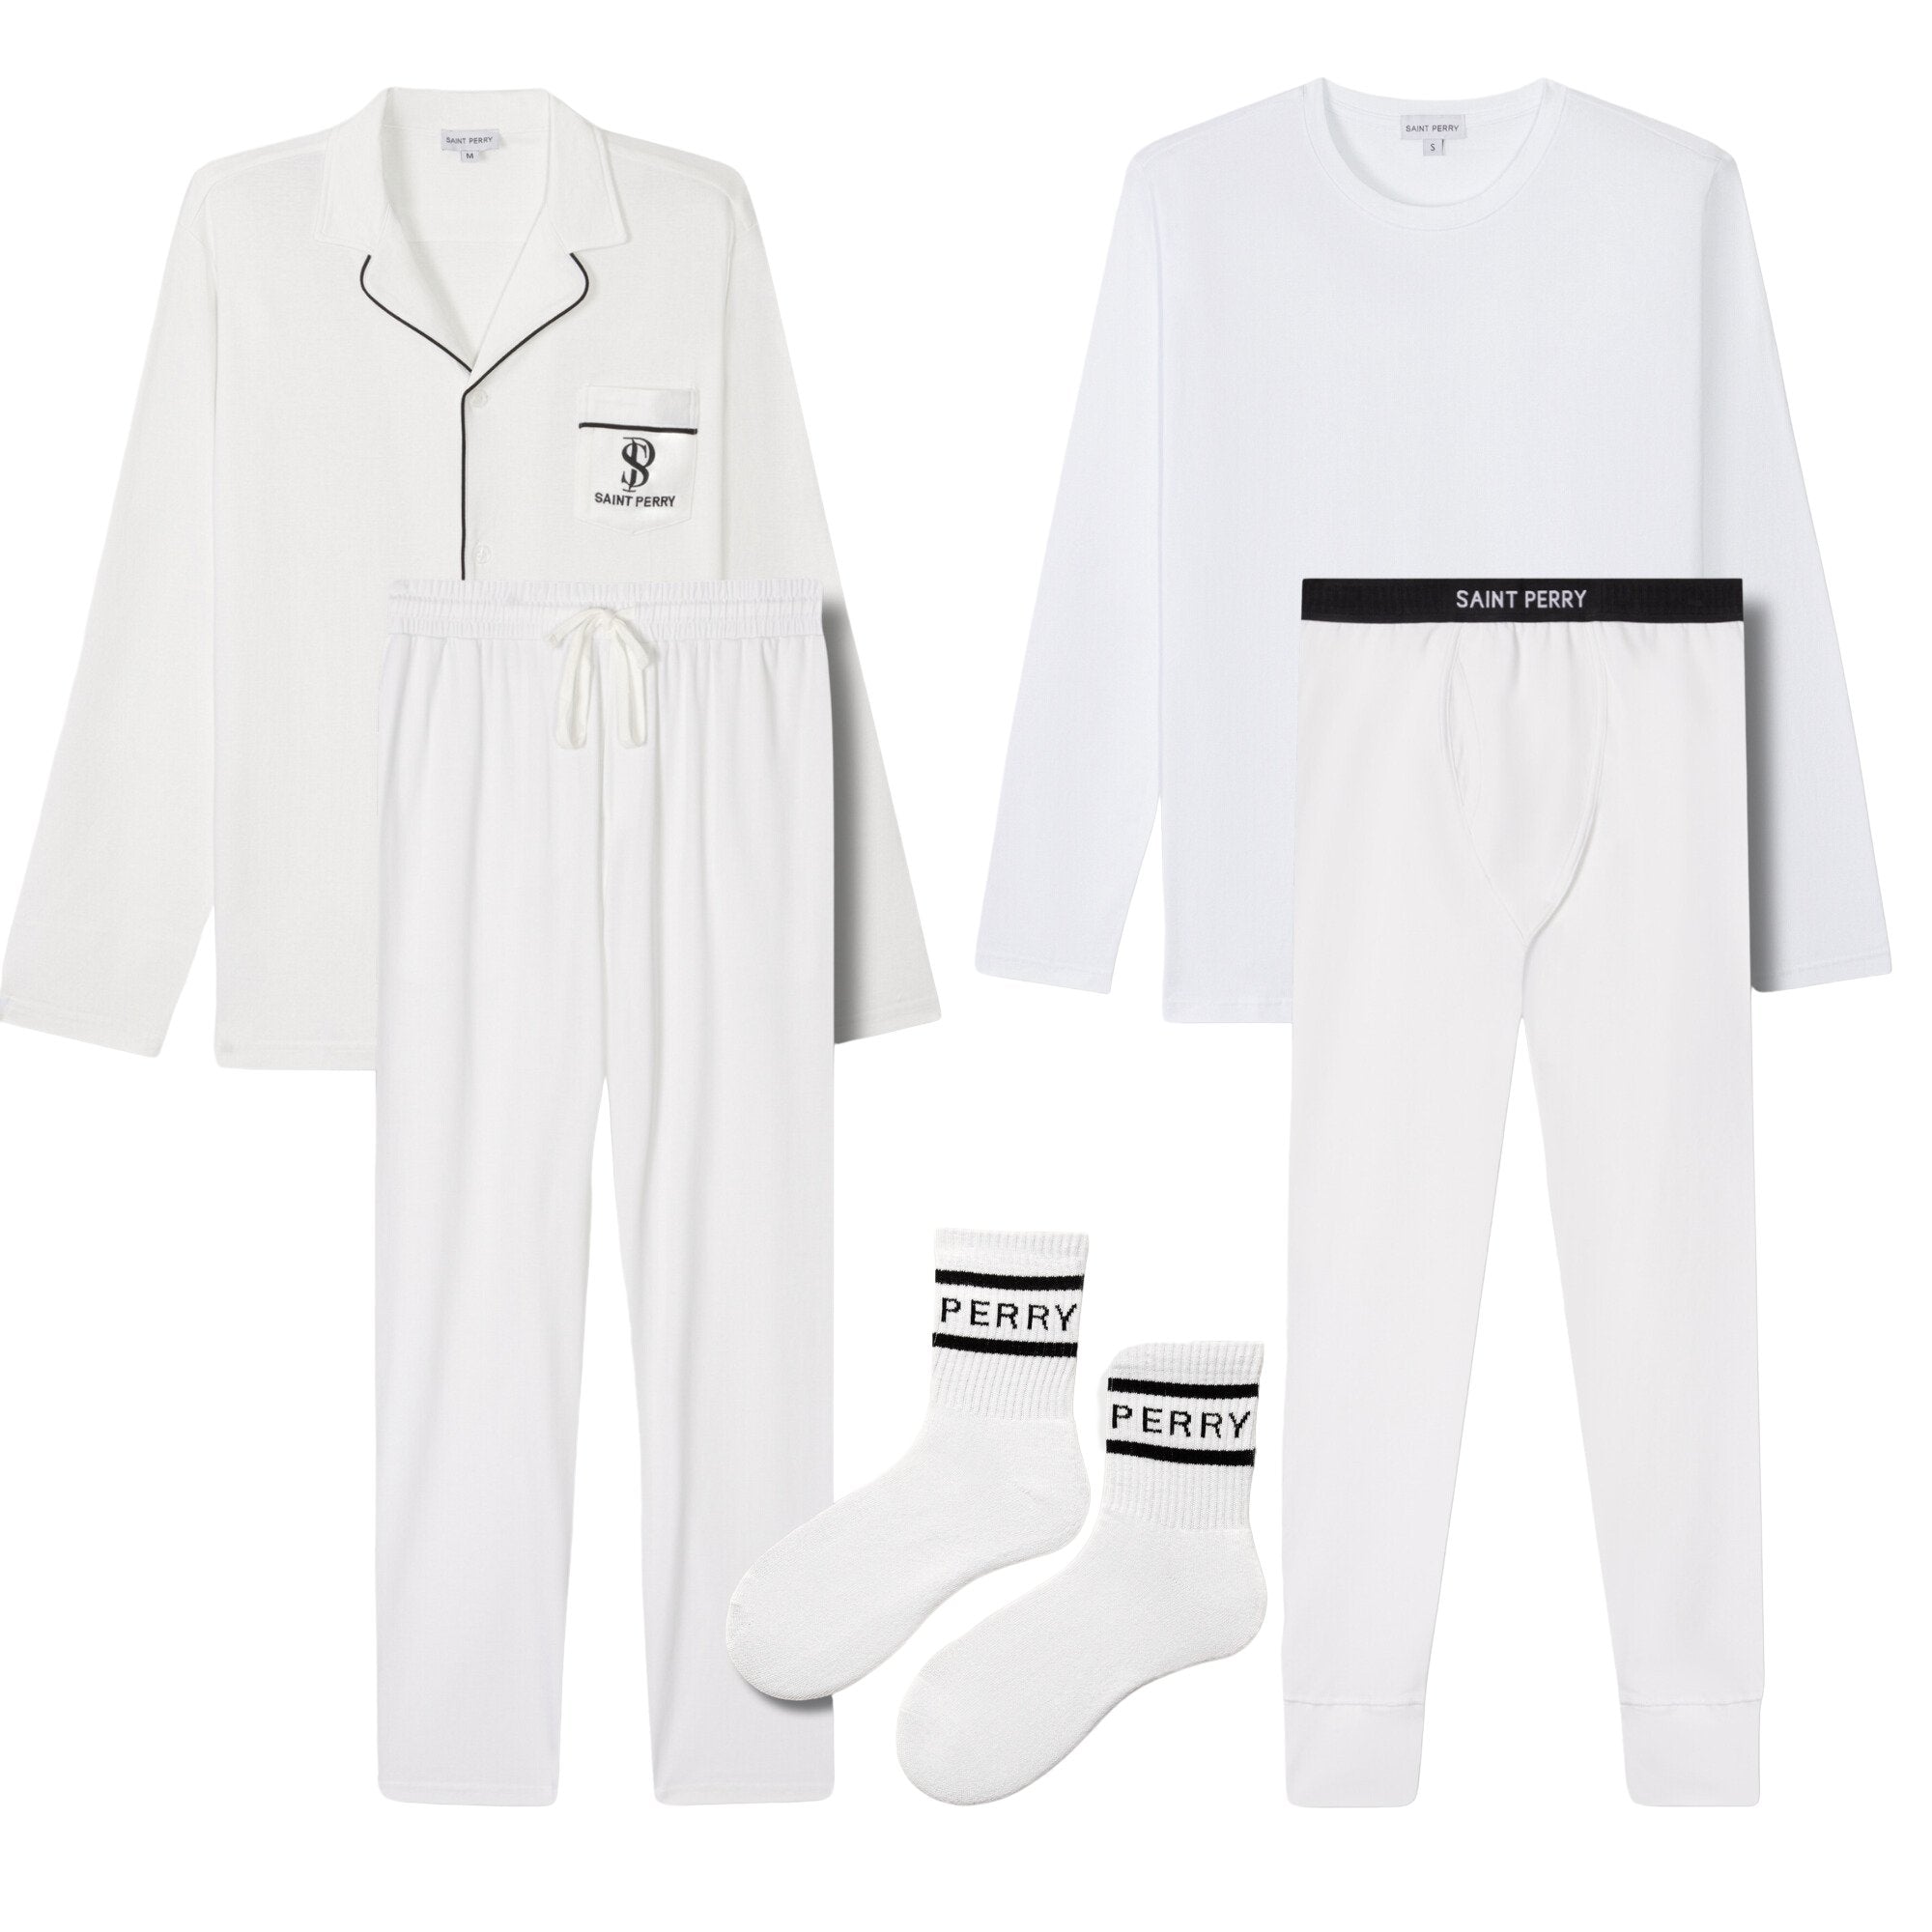 Leisurely & Thermal White Sets - SAINT PERRY